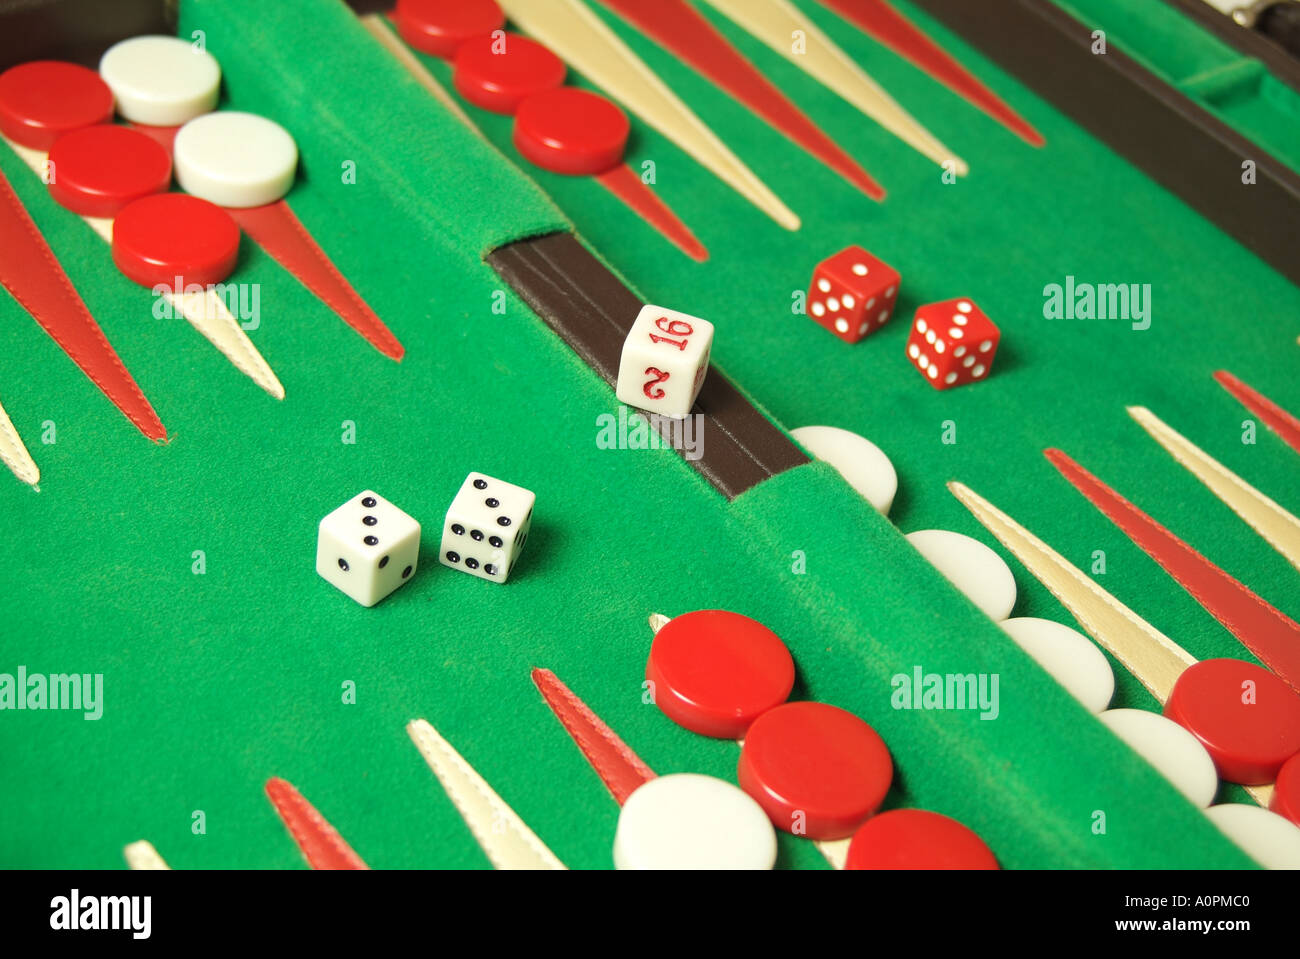 Close up shot of Backgammon game in designer case with red and white checkers, two red dice. Stock Photo